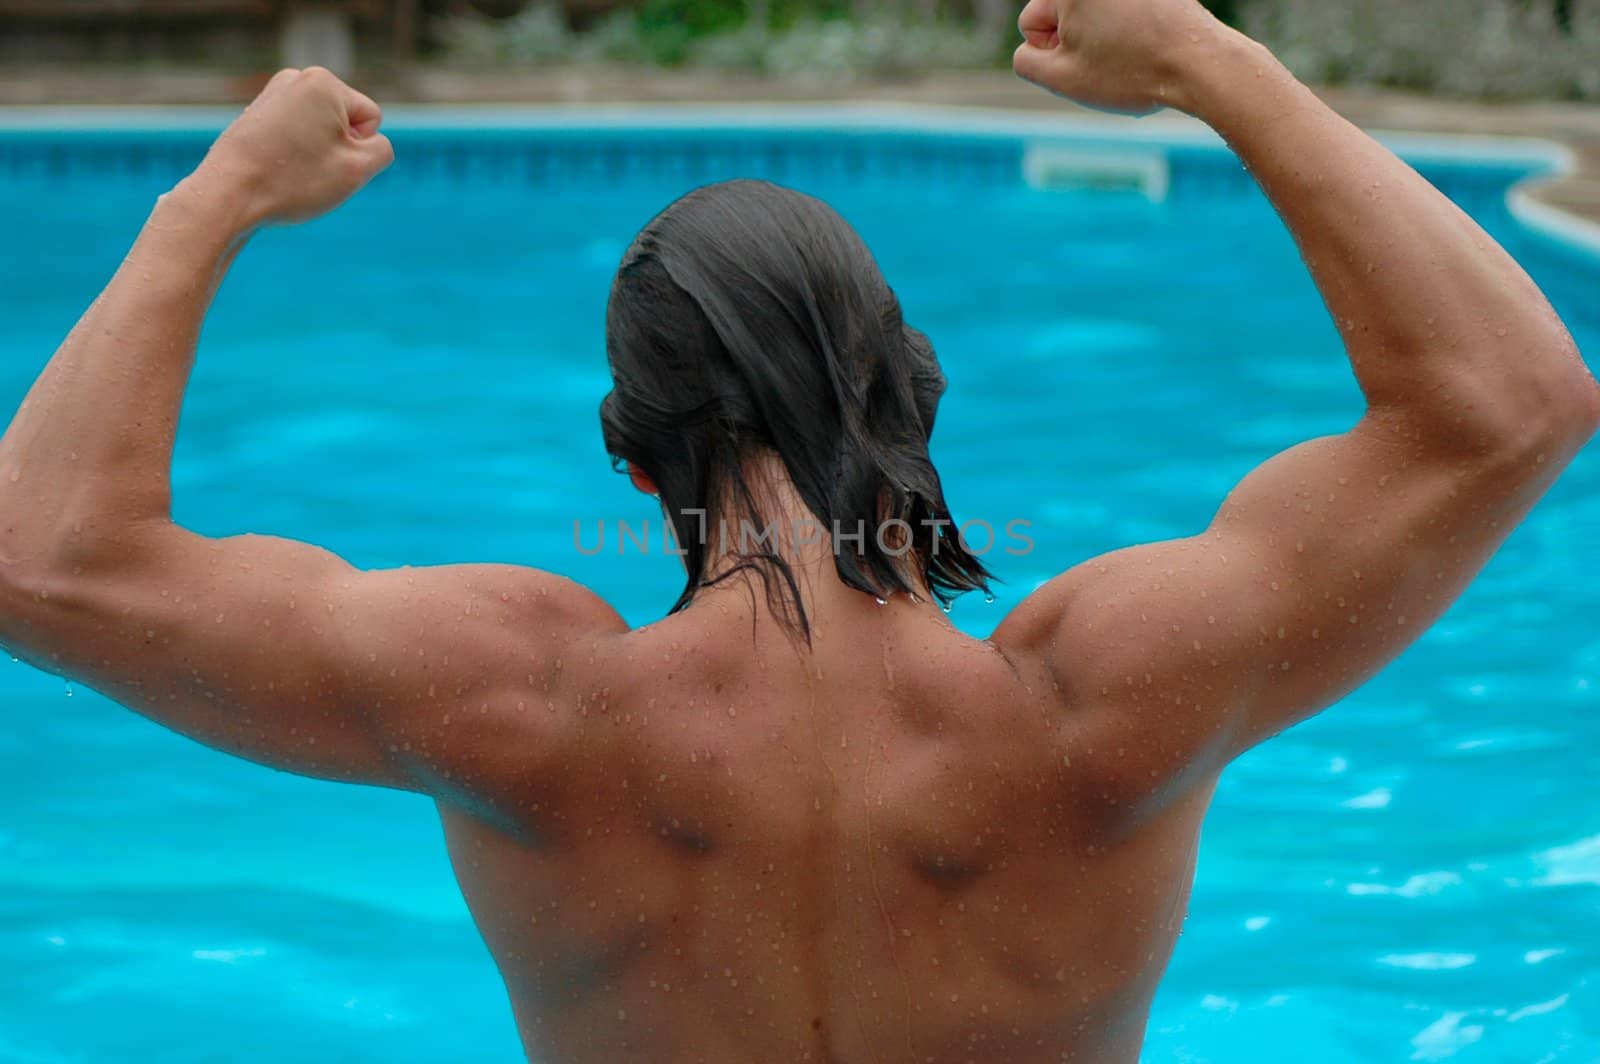 A muscular swimmer shows off his powerful shoulders.